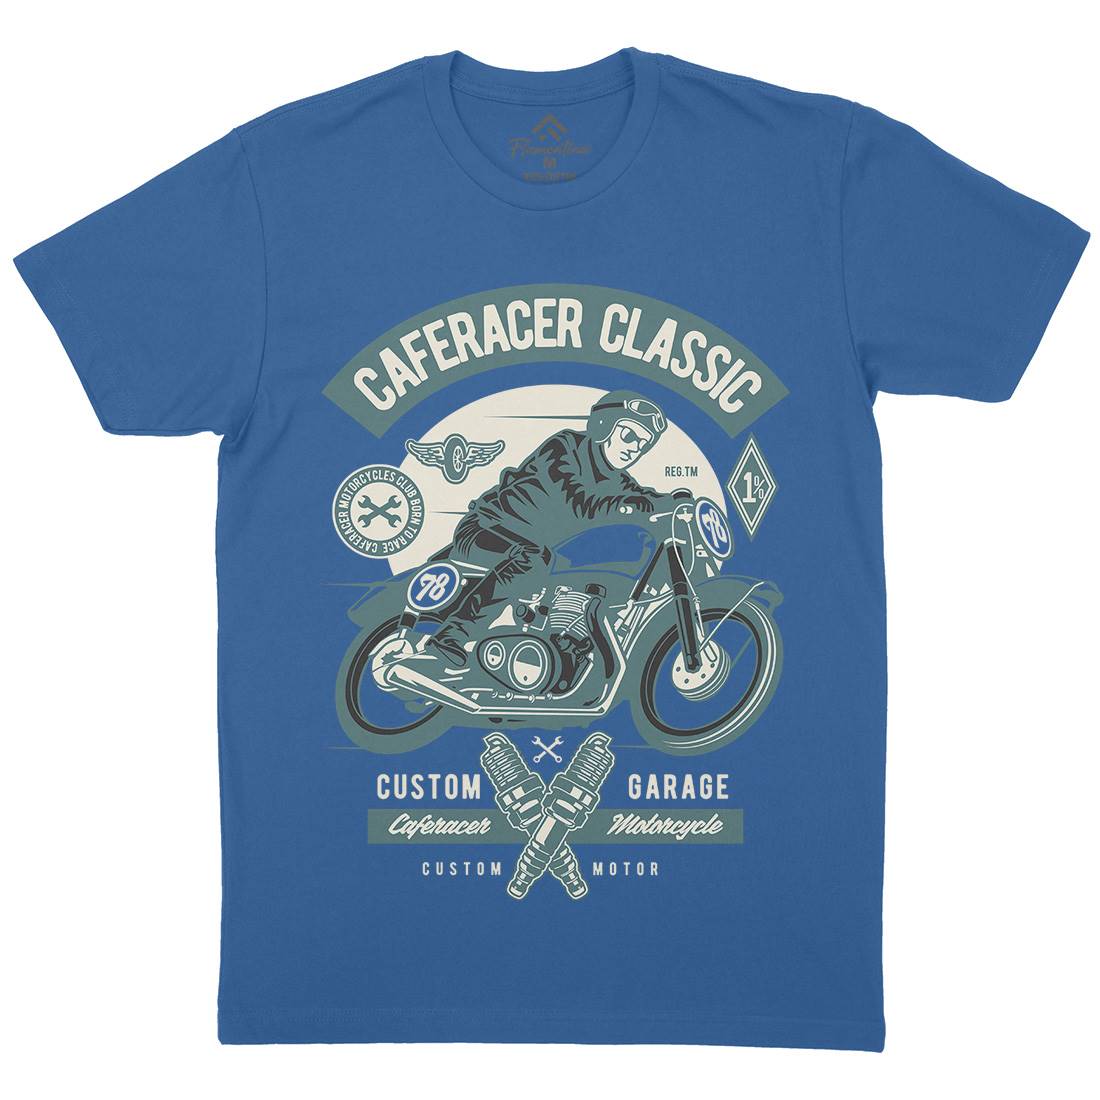 Caferacer Rider Mens Crew Neck T-Shirt Motorcycles D515